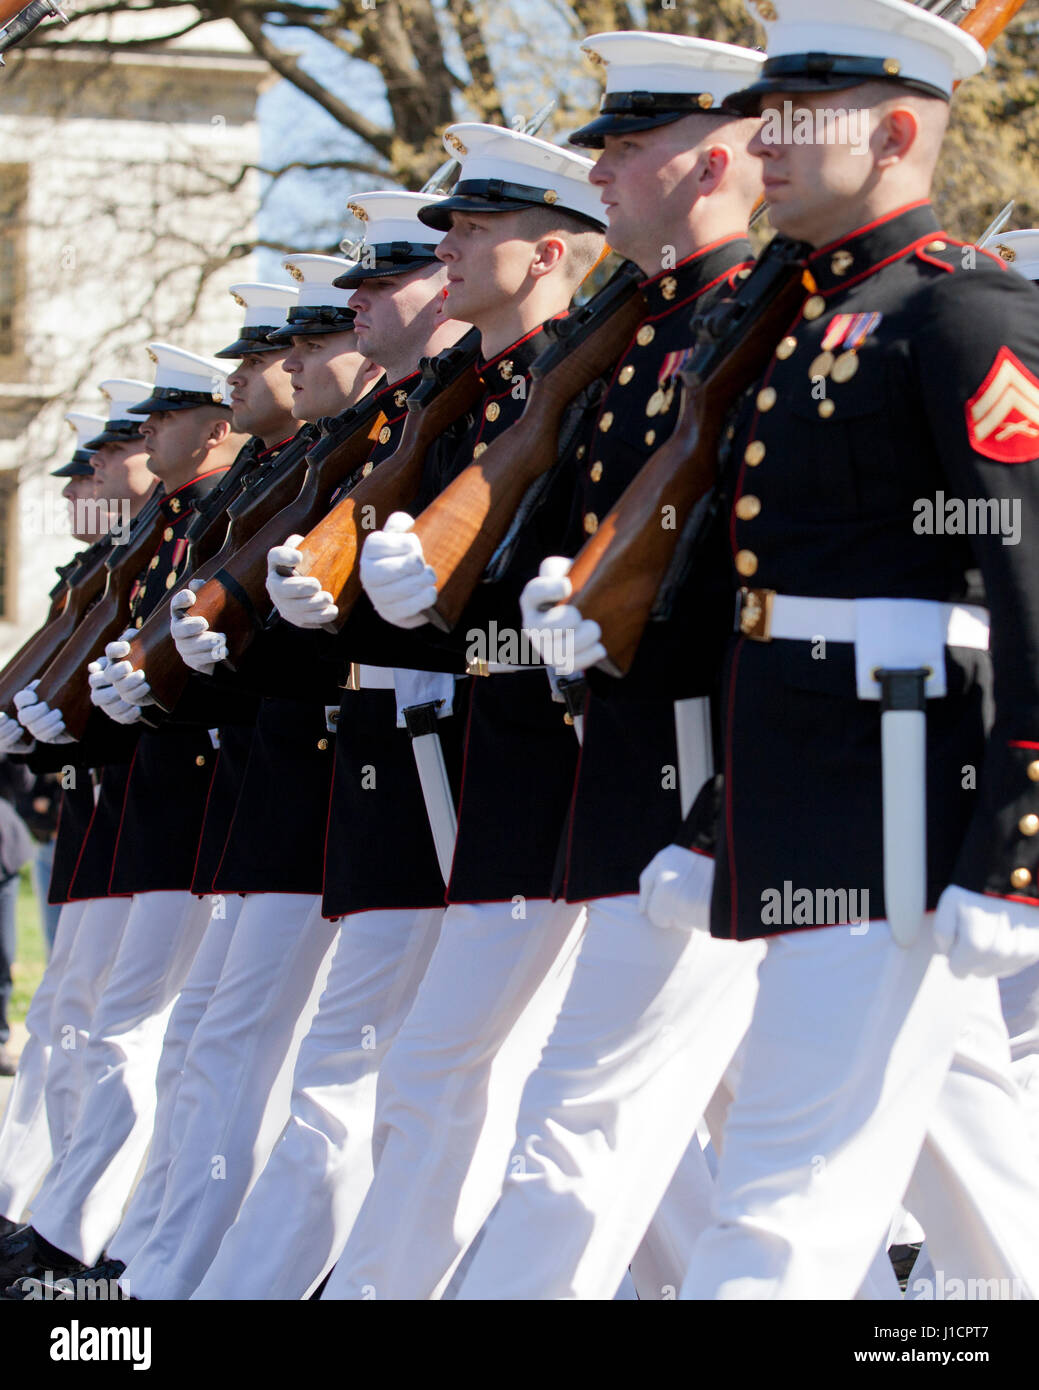 US Marine Corps Honor Guard marching during parade - USA Stock Photo